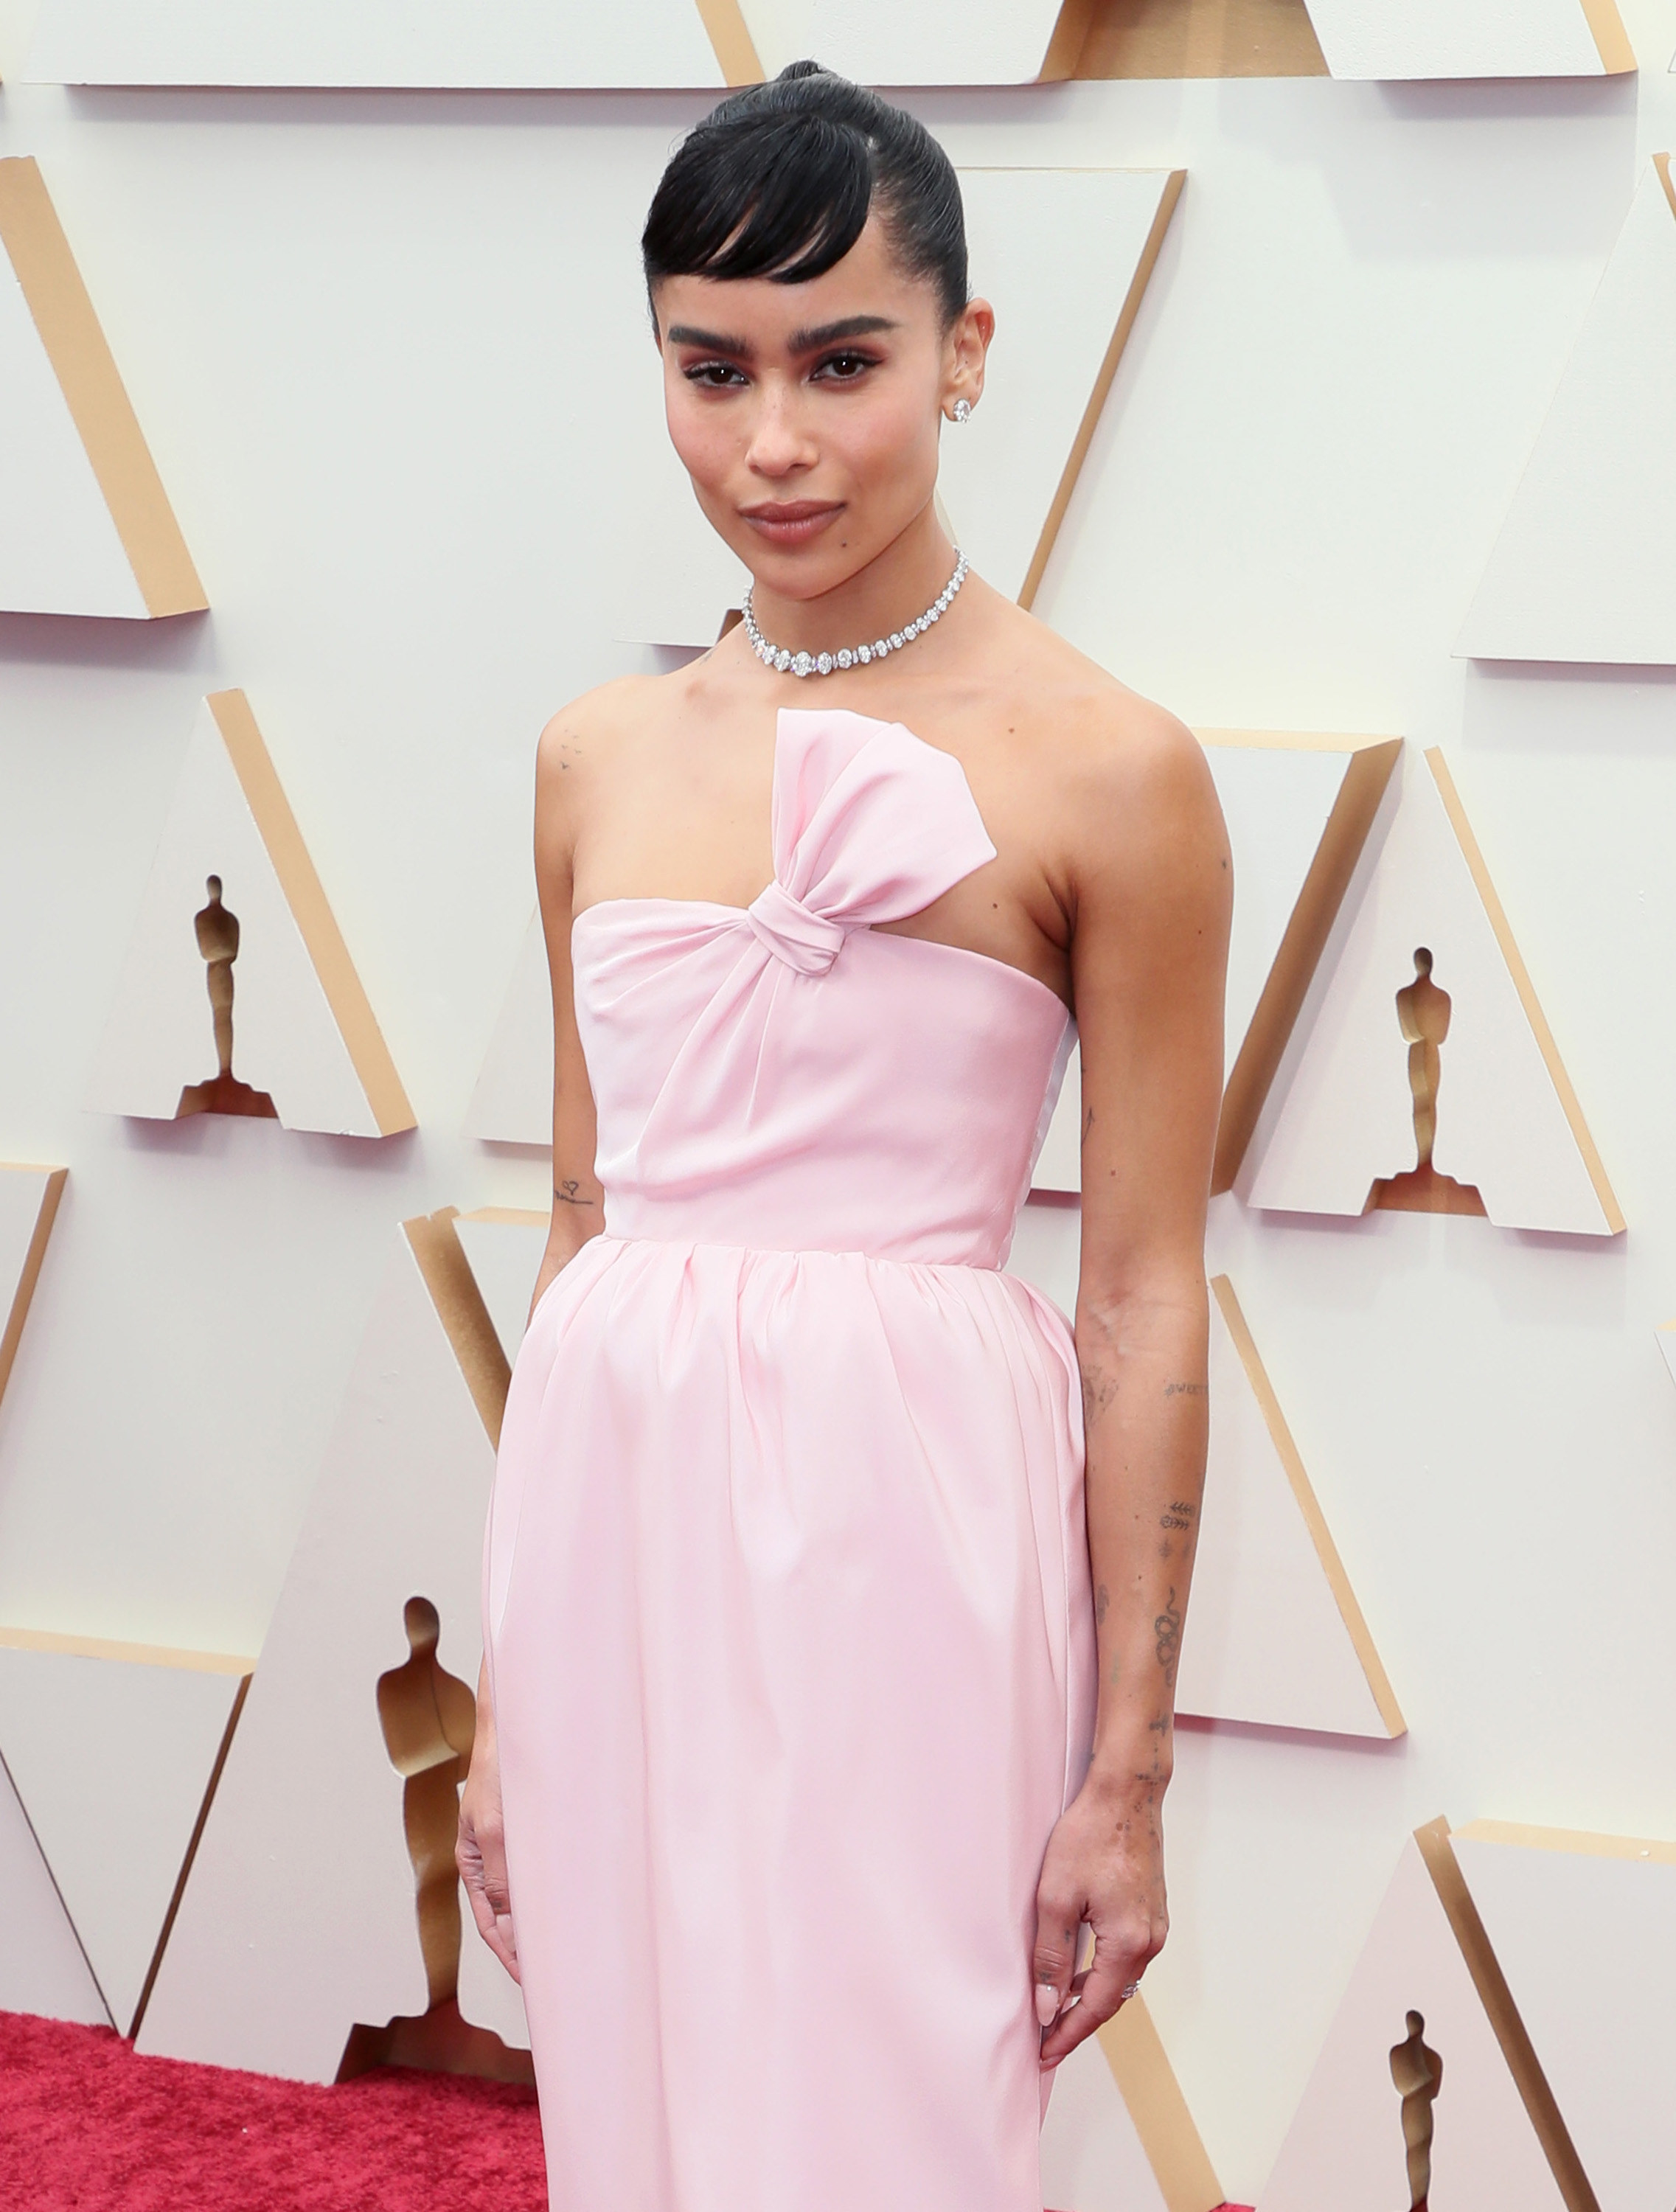 Zoë posing on the Oscars red carpet in a strapless gown